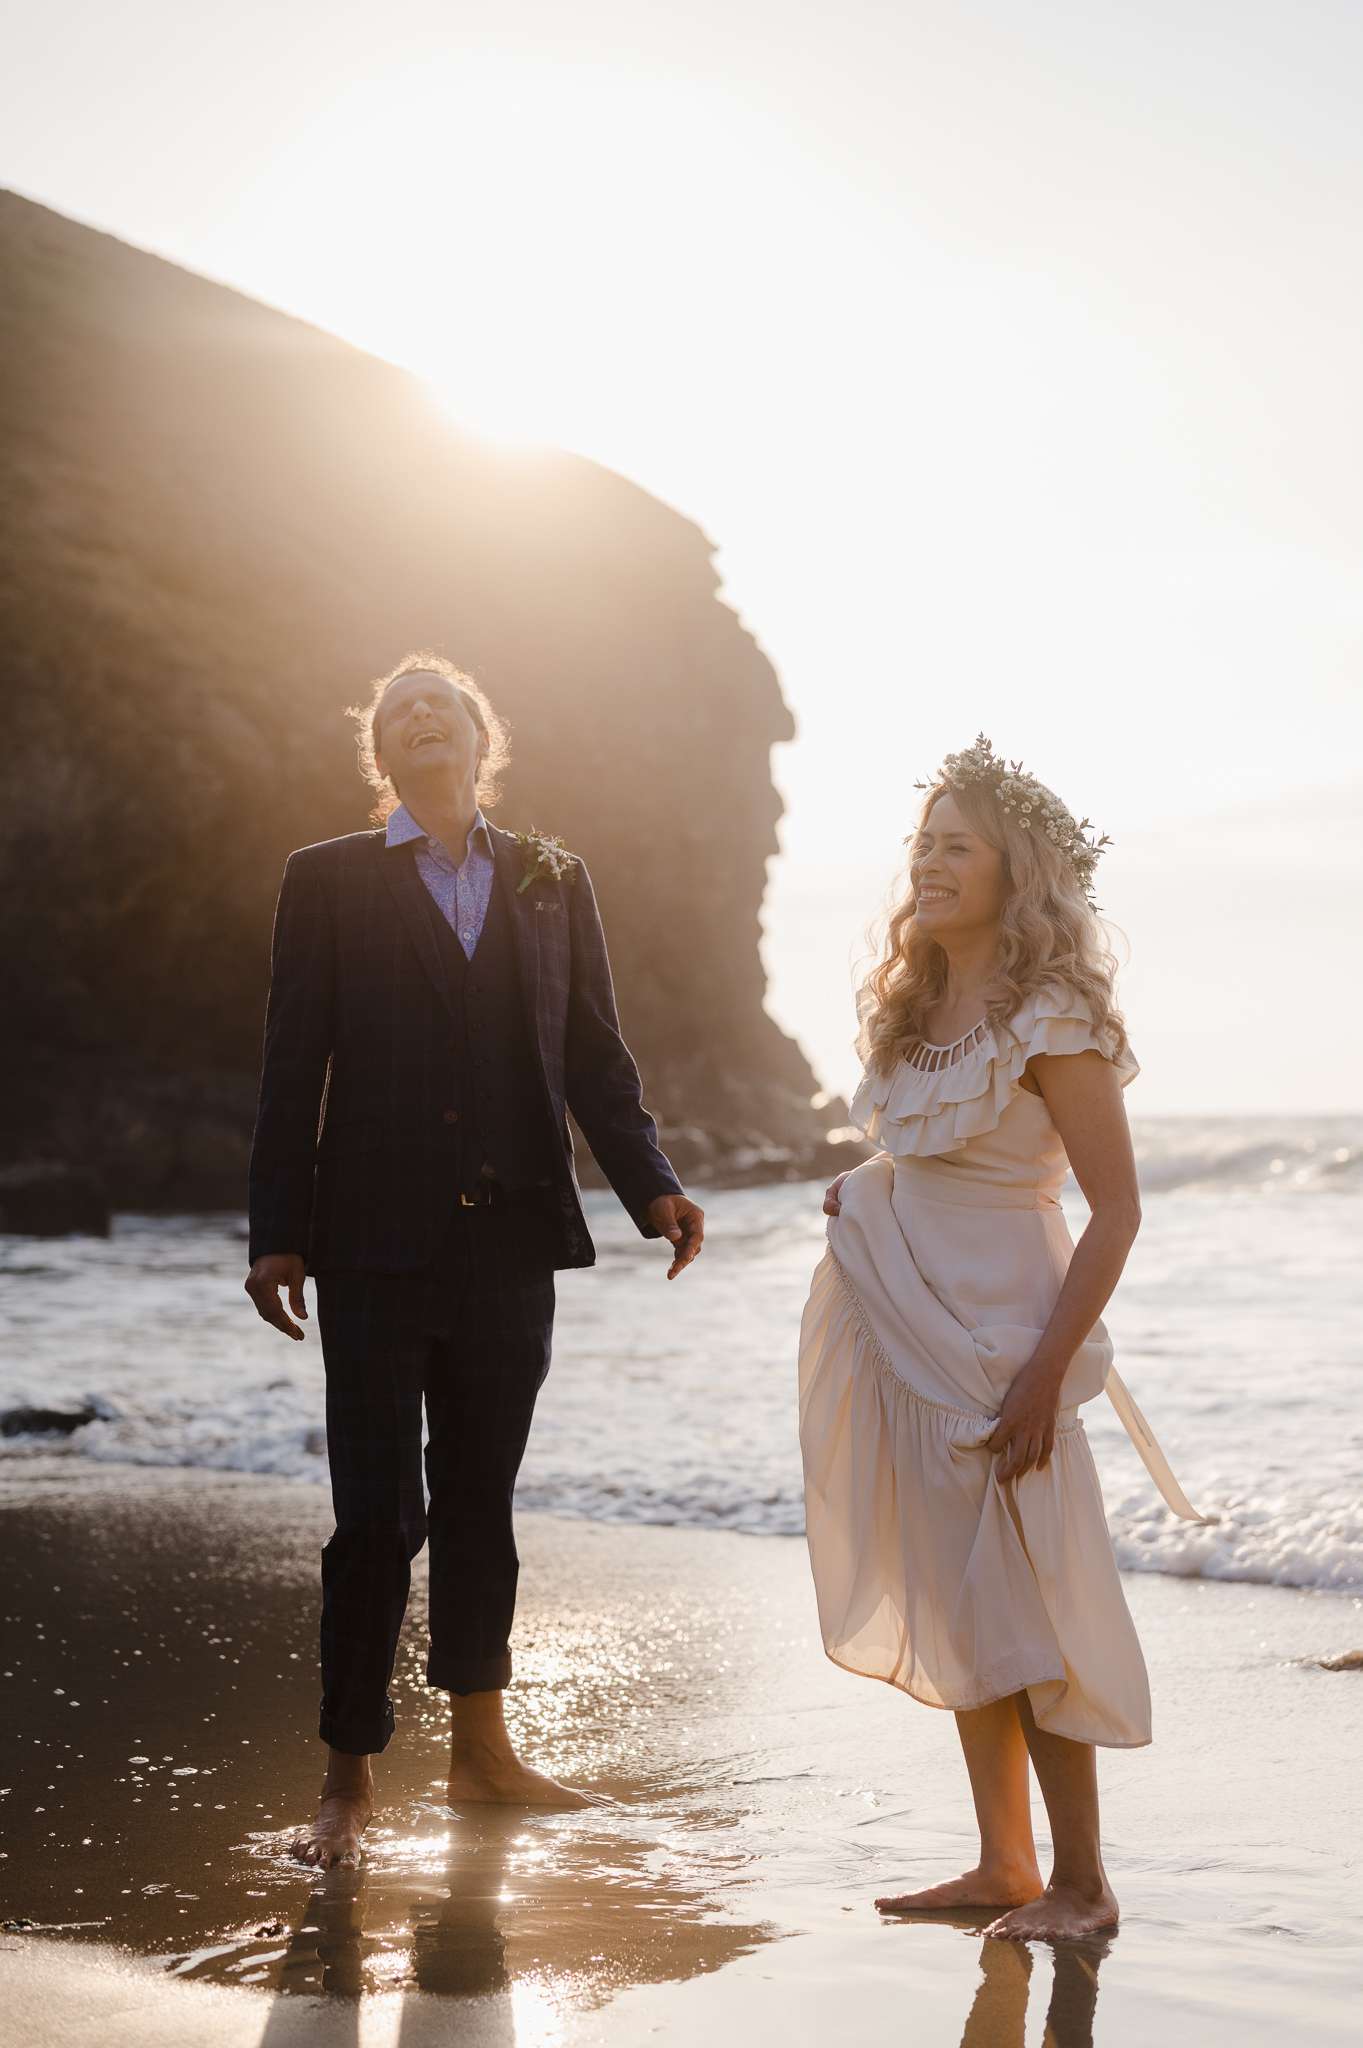 Beach Elopement at Chapel Porth, Cornwall - Say ‘I Do’ in Style: How to Plan a Destination Wedding that will leave your guests speechless